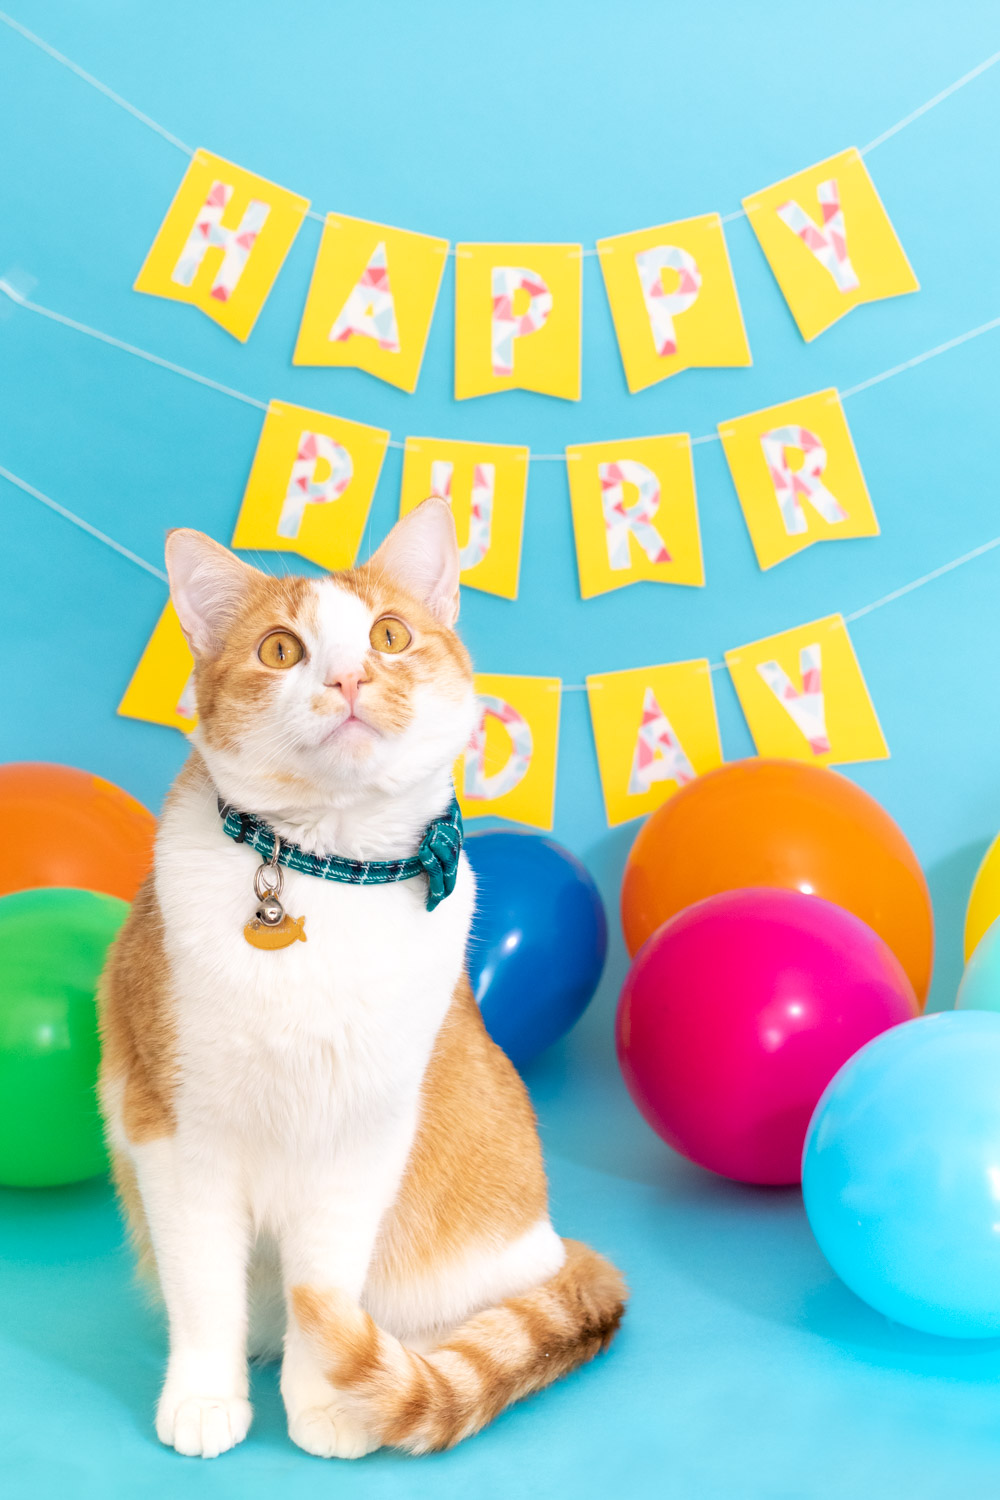 cat in front of banner for cat birthday celebration